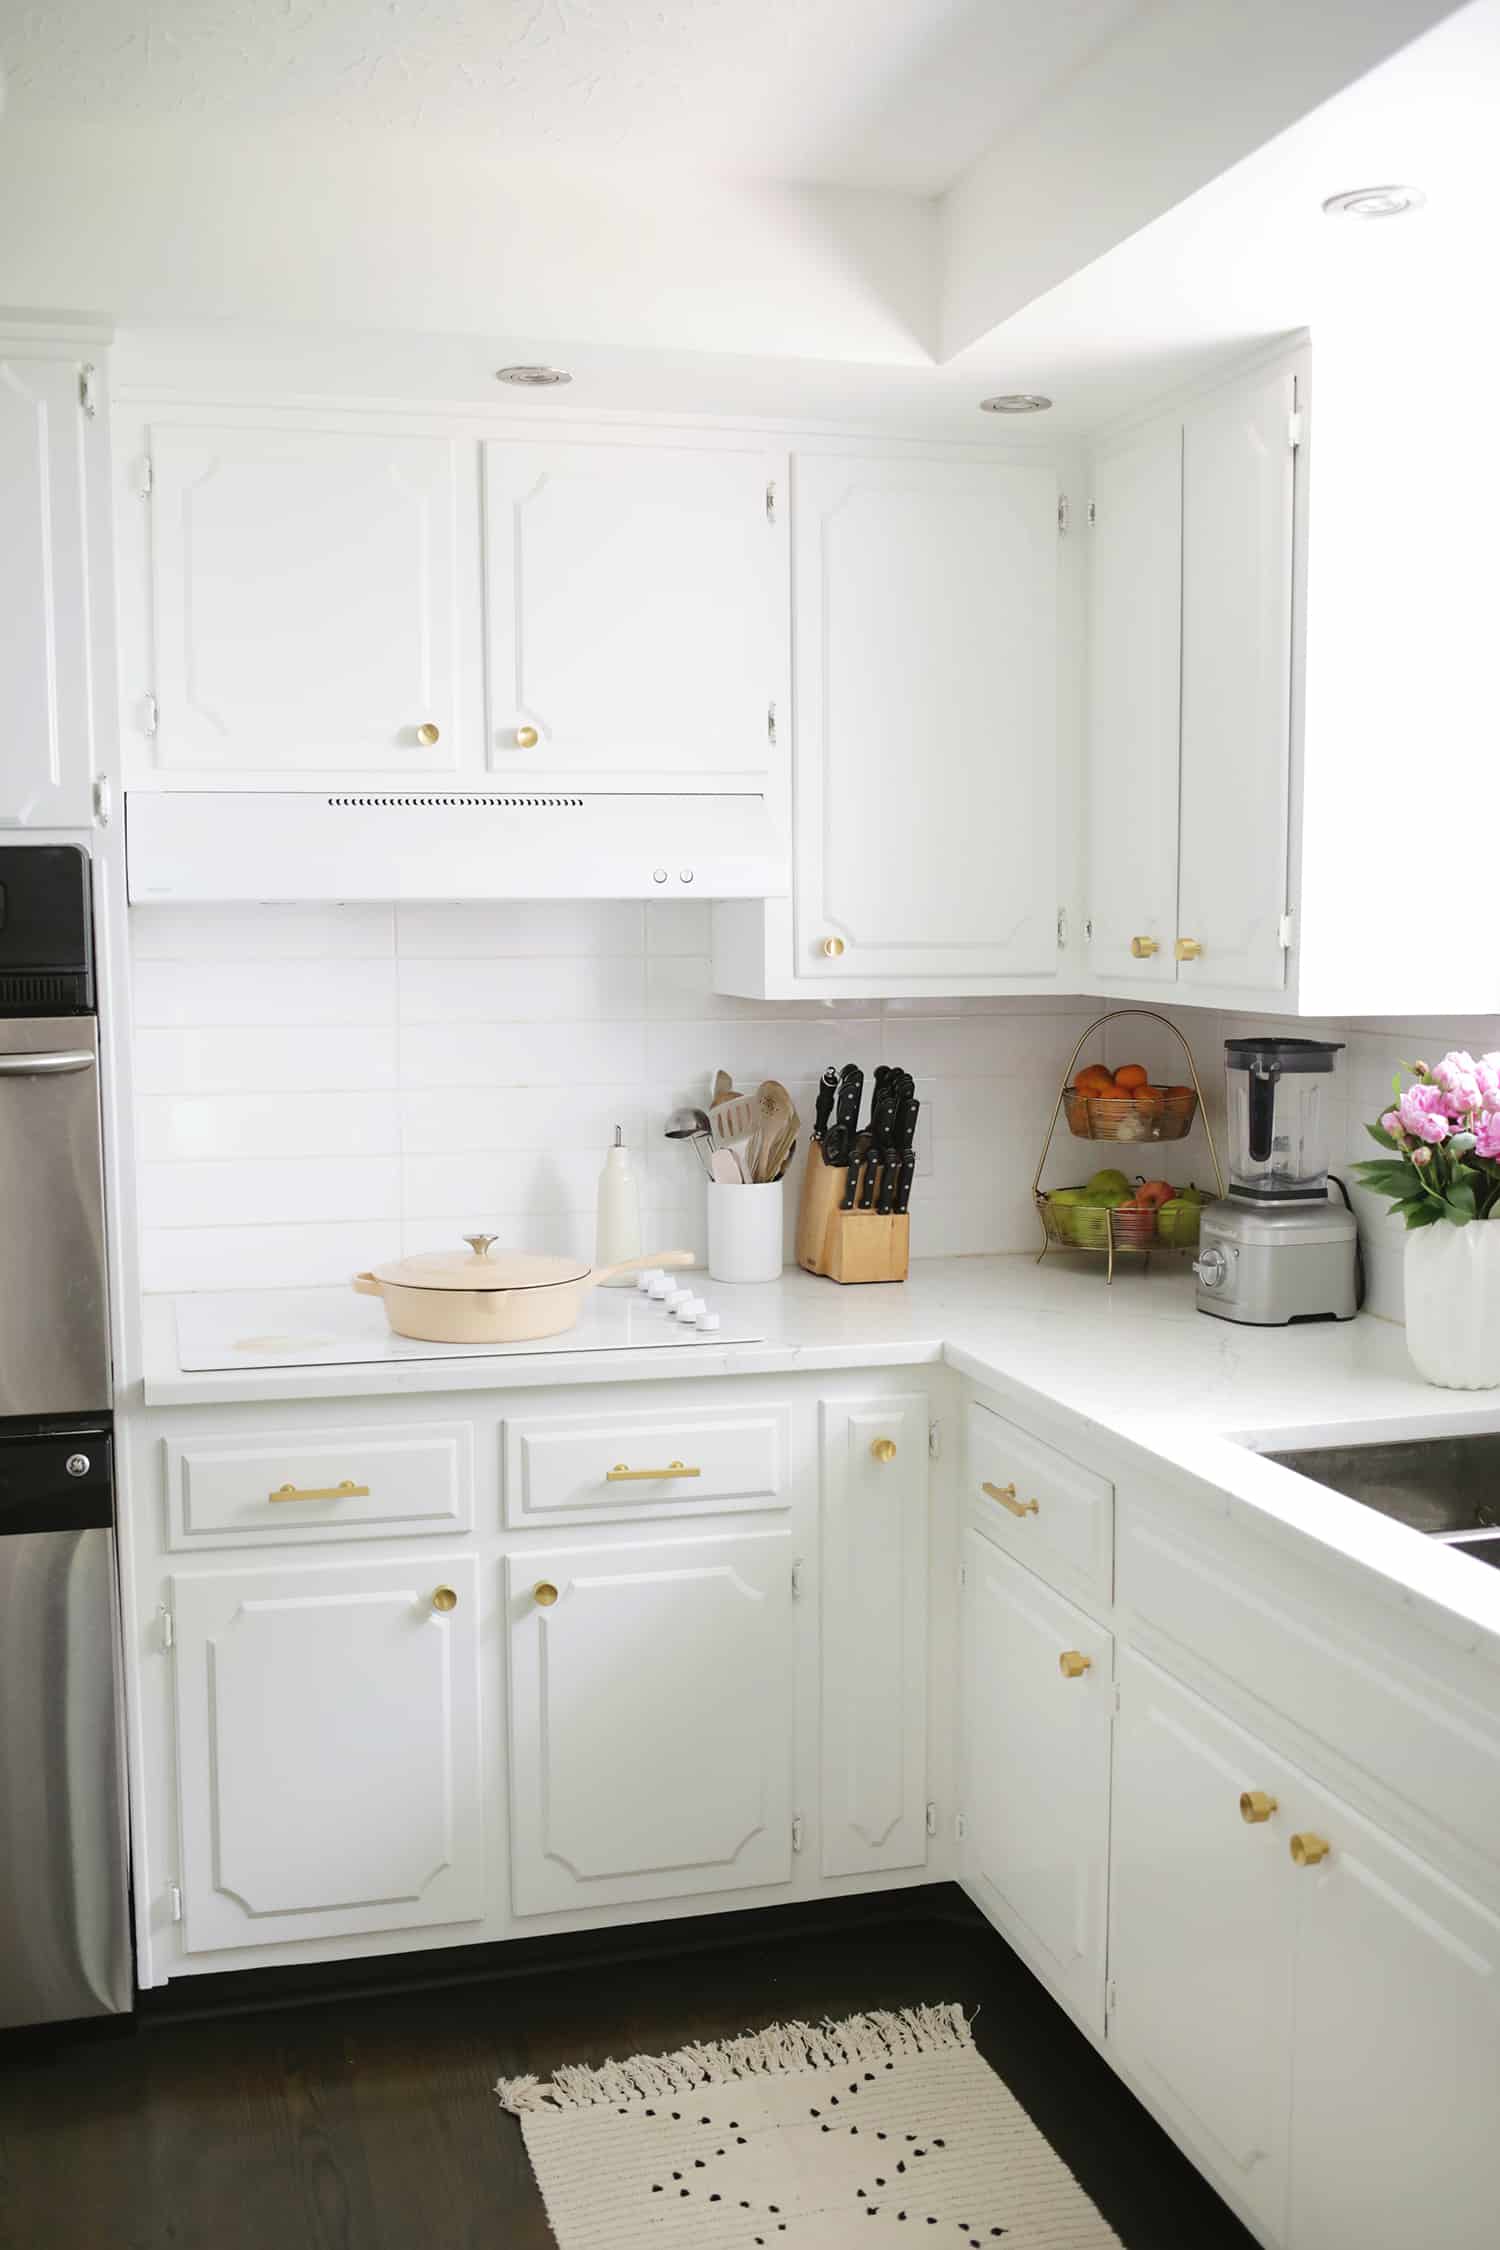 wider view of white kitchen with gold handle